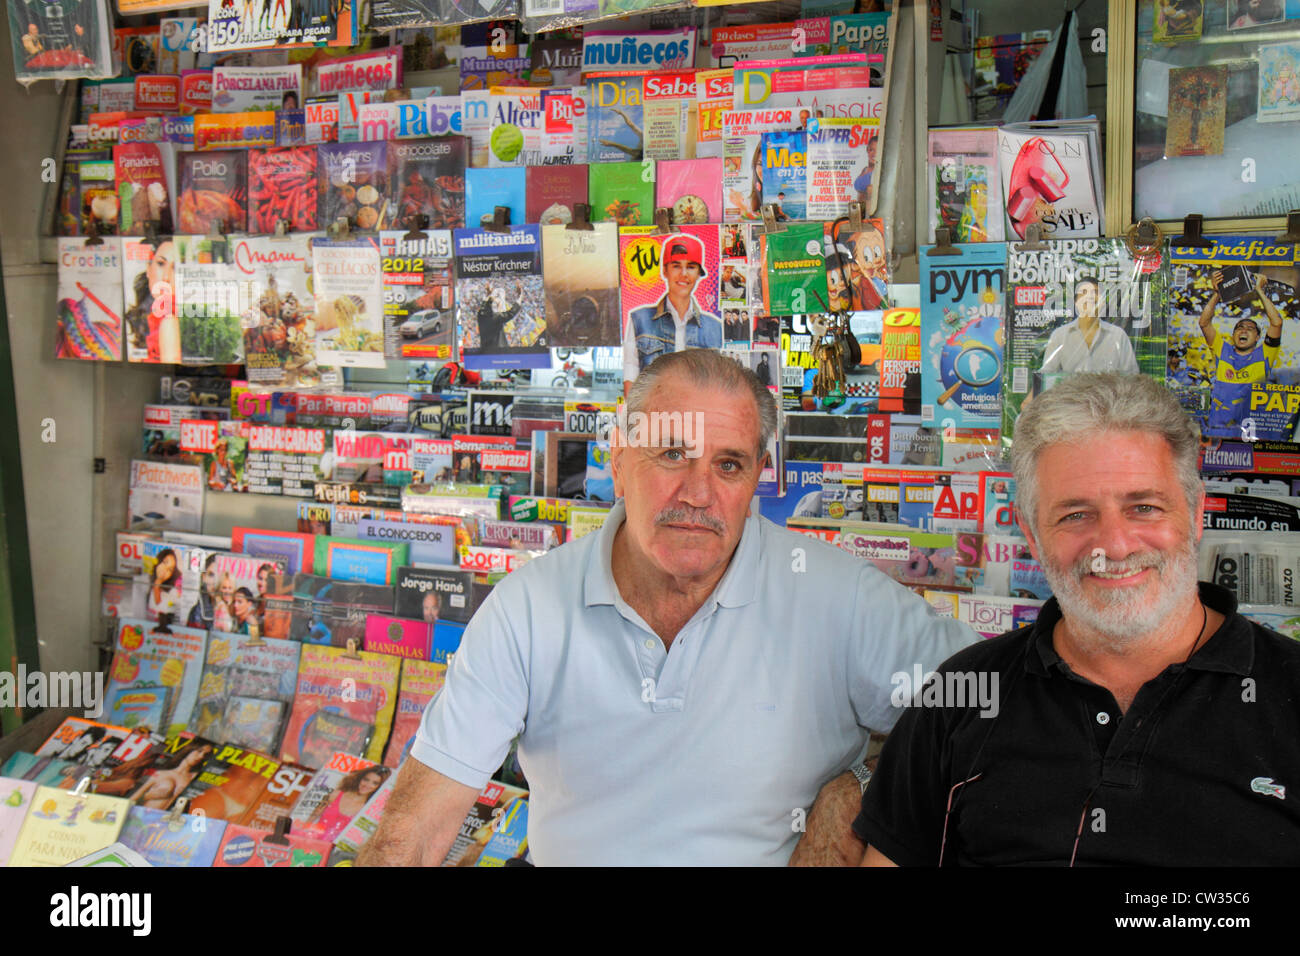 Buenos Aires Argentina,Avenida Rivadavia,newsstand,stall,magazines,Hispanic ethnic man men male adult adults,work,employee worker workers working staf Stock Photo